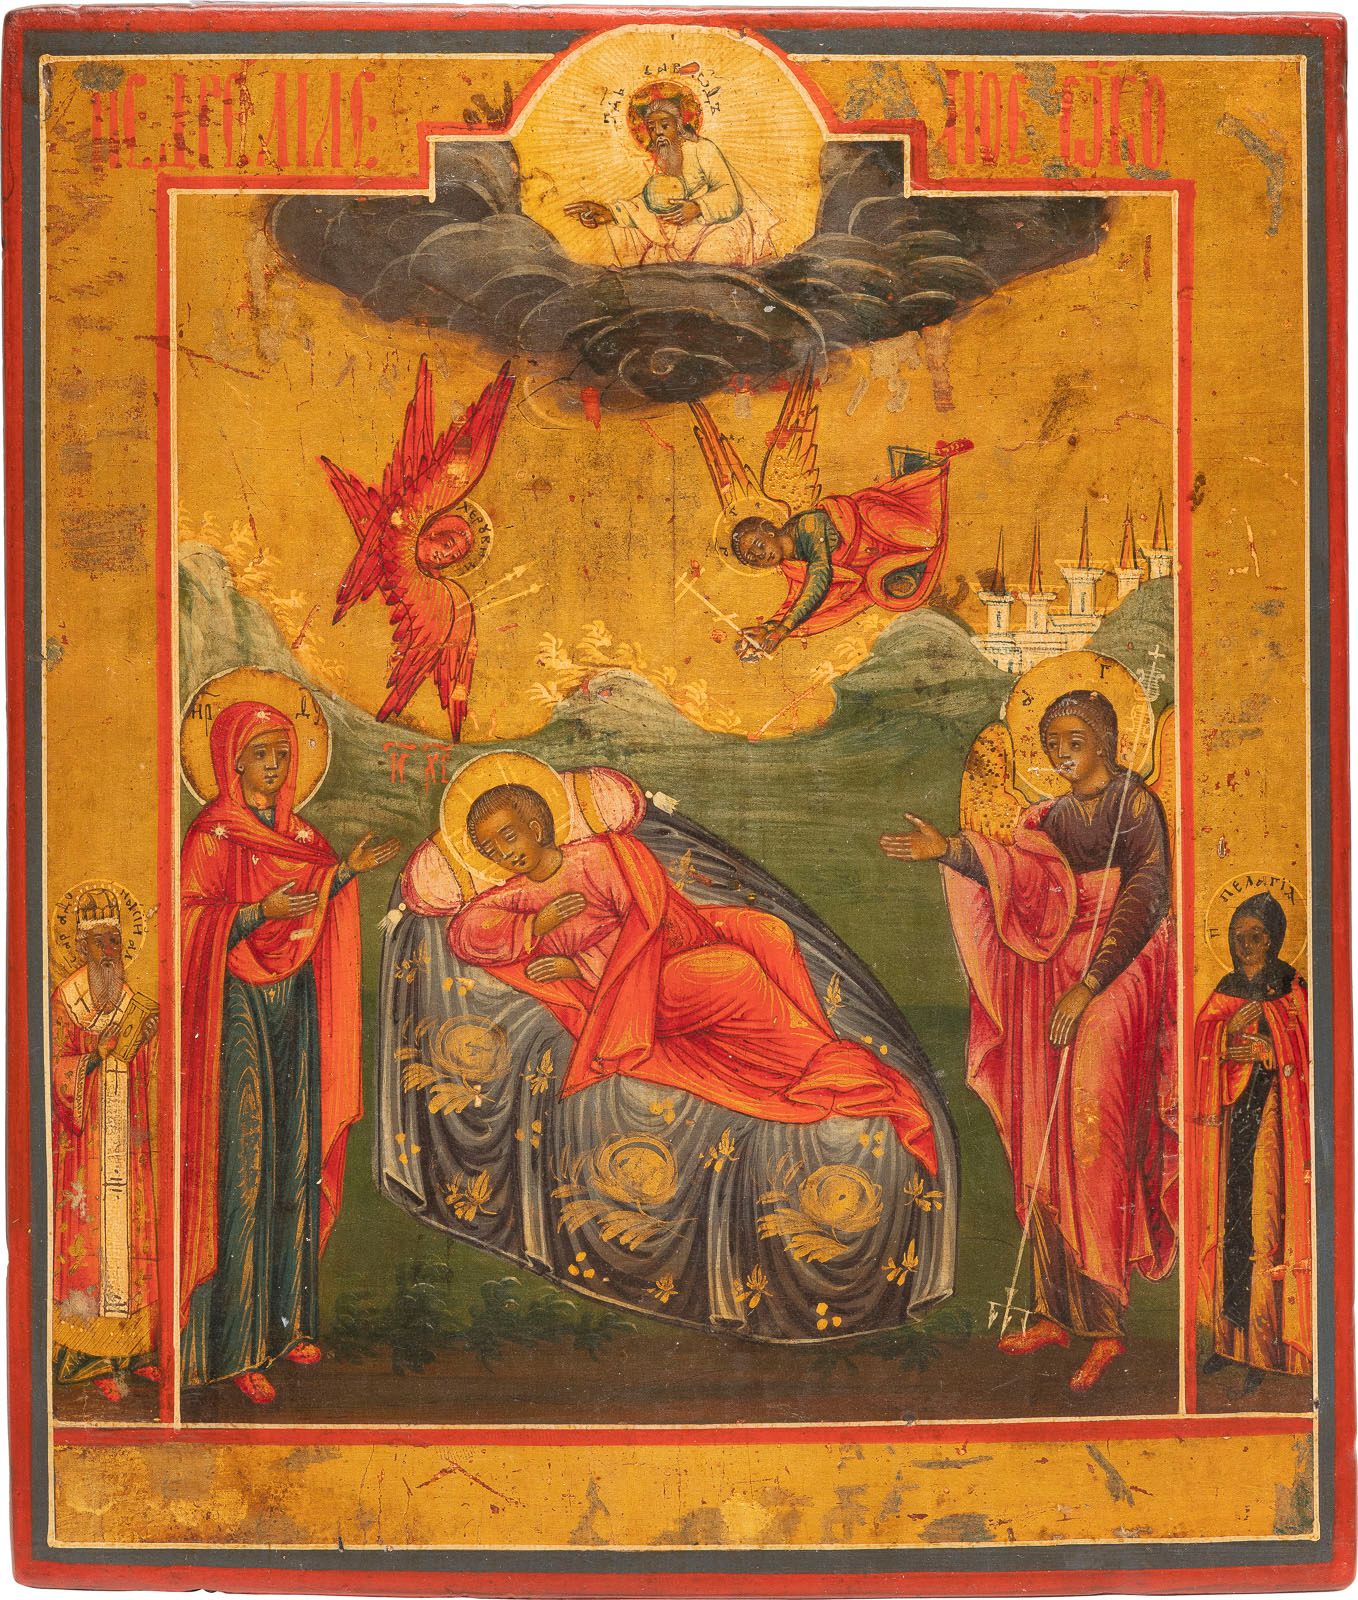 A SMALL ICON SHOWING CHRIST 'THE UNSLEEPING EYE' A SMALL ICON SHOWING CHRIST 'TH&hellip;